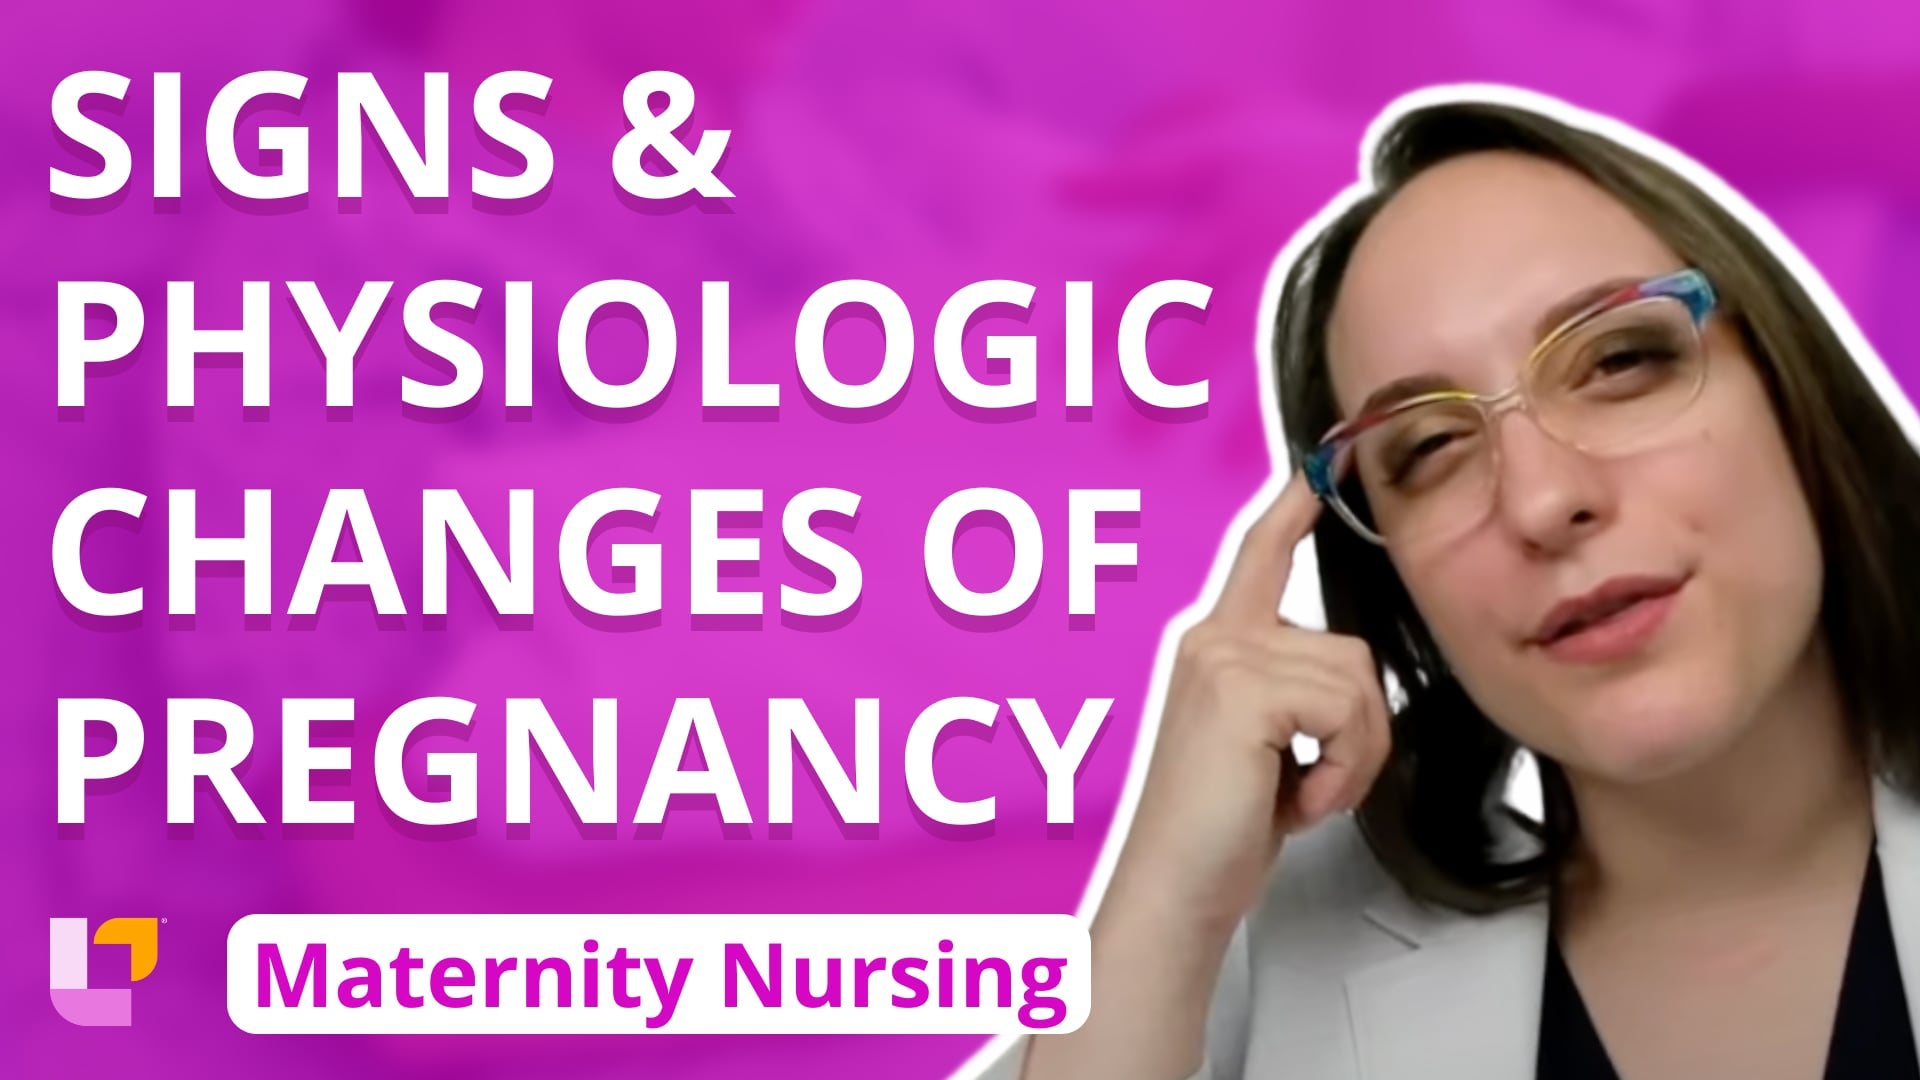 Maternity - Pregnancy, part 1: Signs and Physiologic Changes of Pregnancy - LevelUpRN